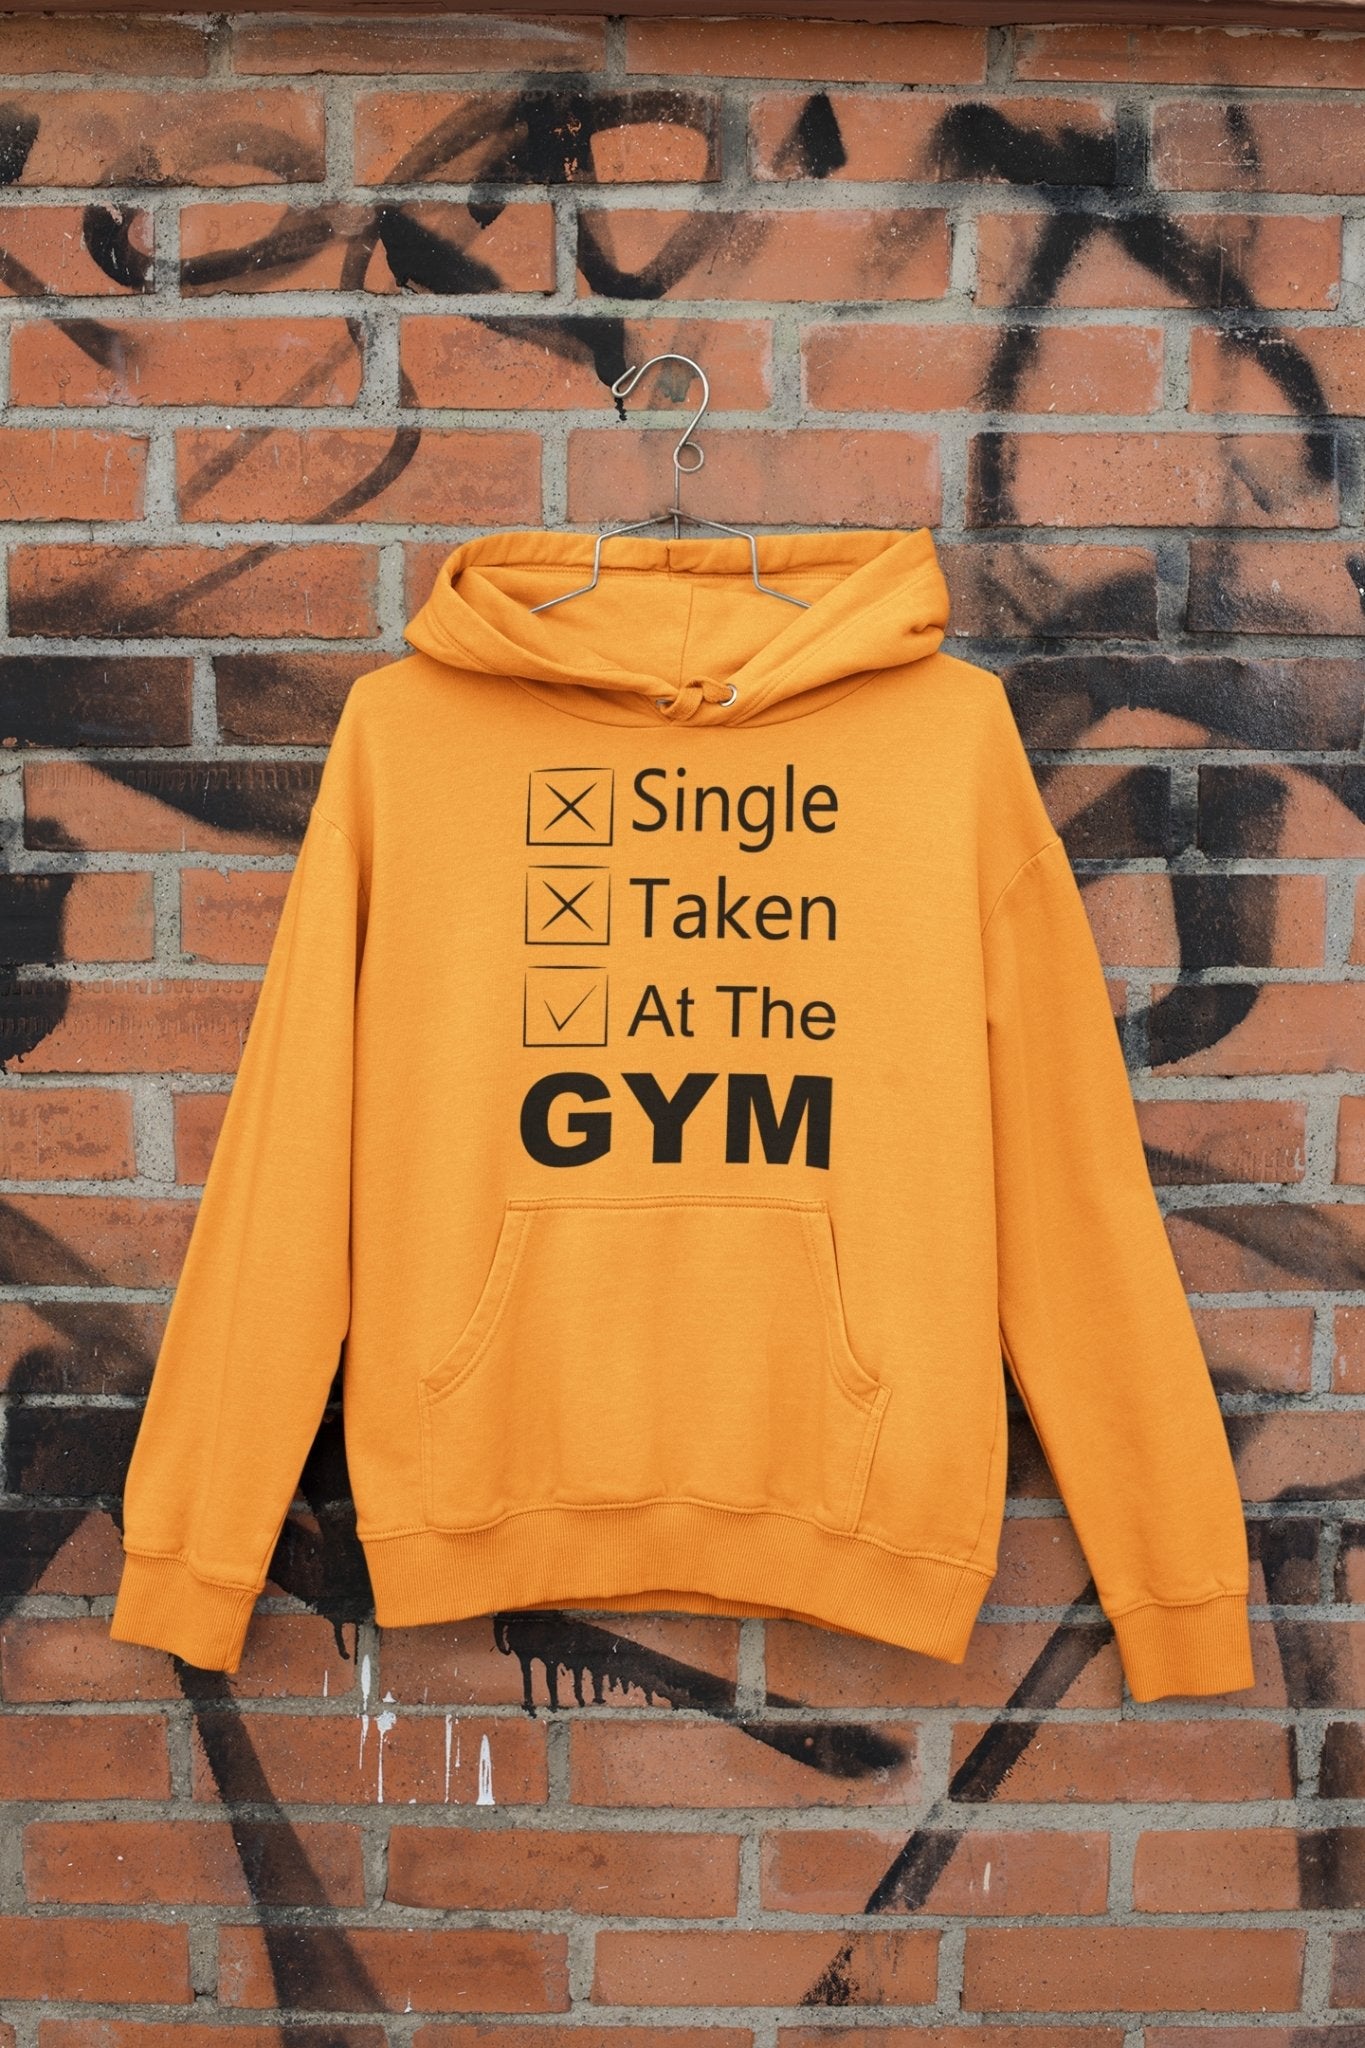 Single Taken At The Gym And Workout Hoodies for Women-FunkyTeesClub - Funky Tees Club